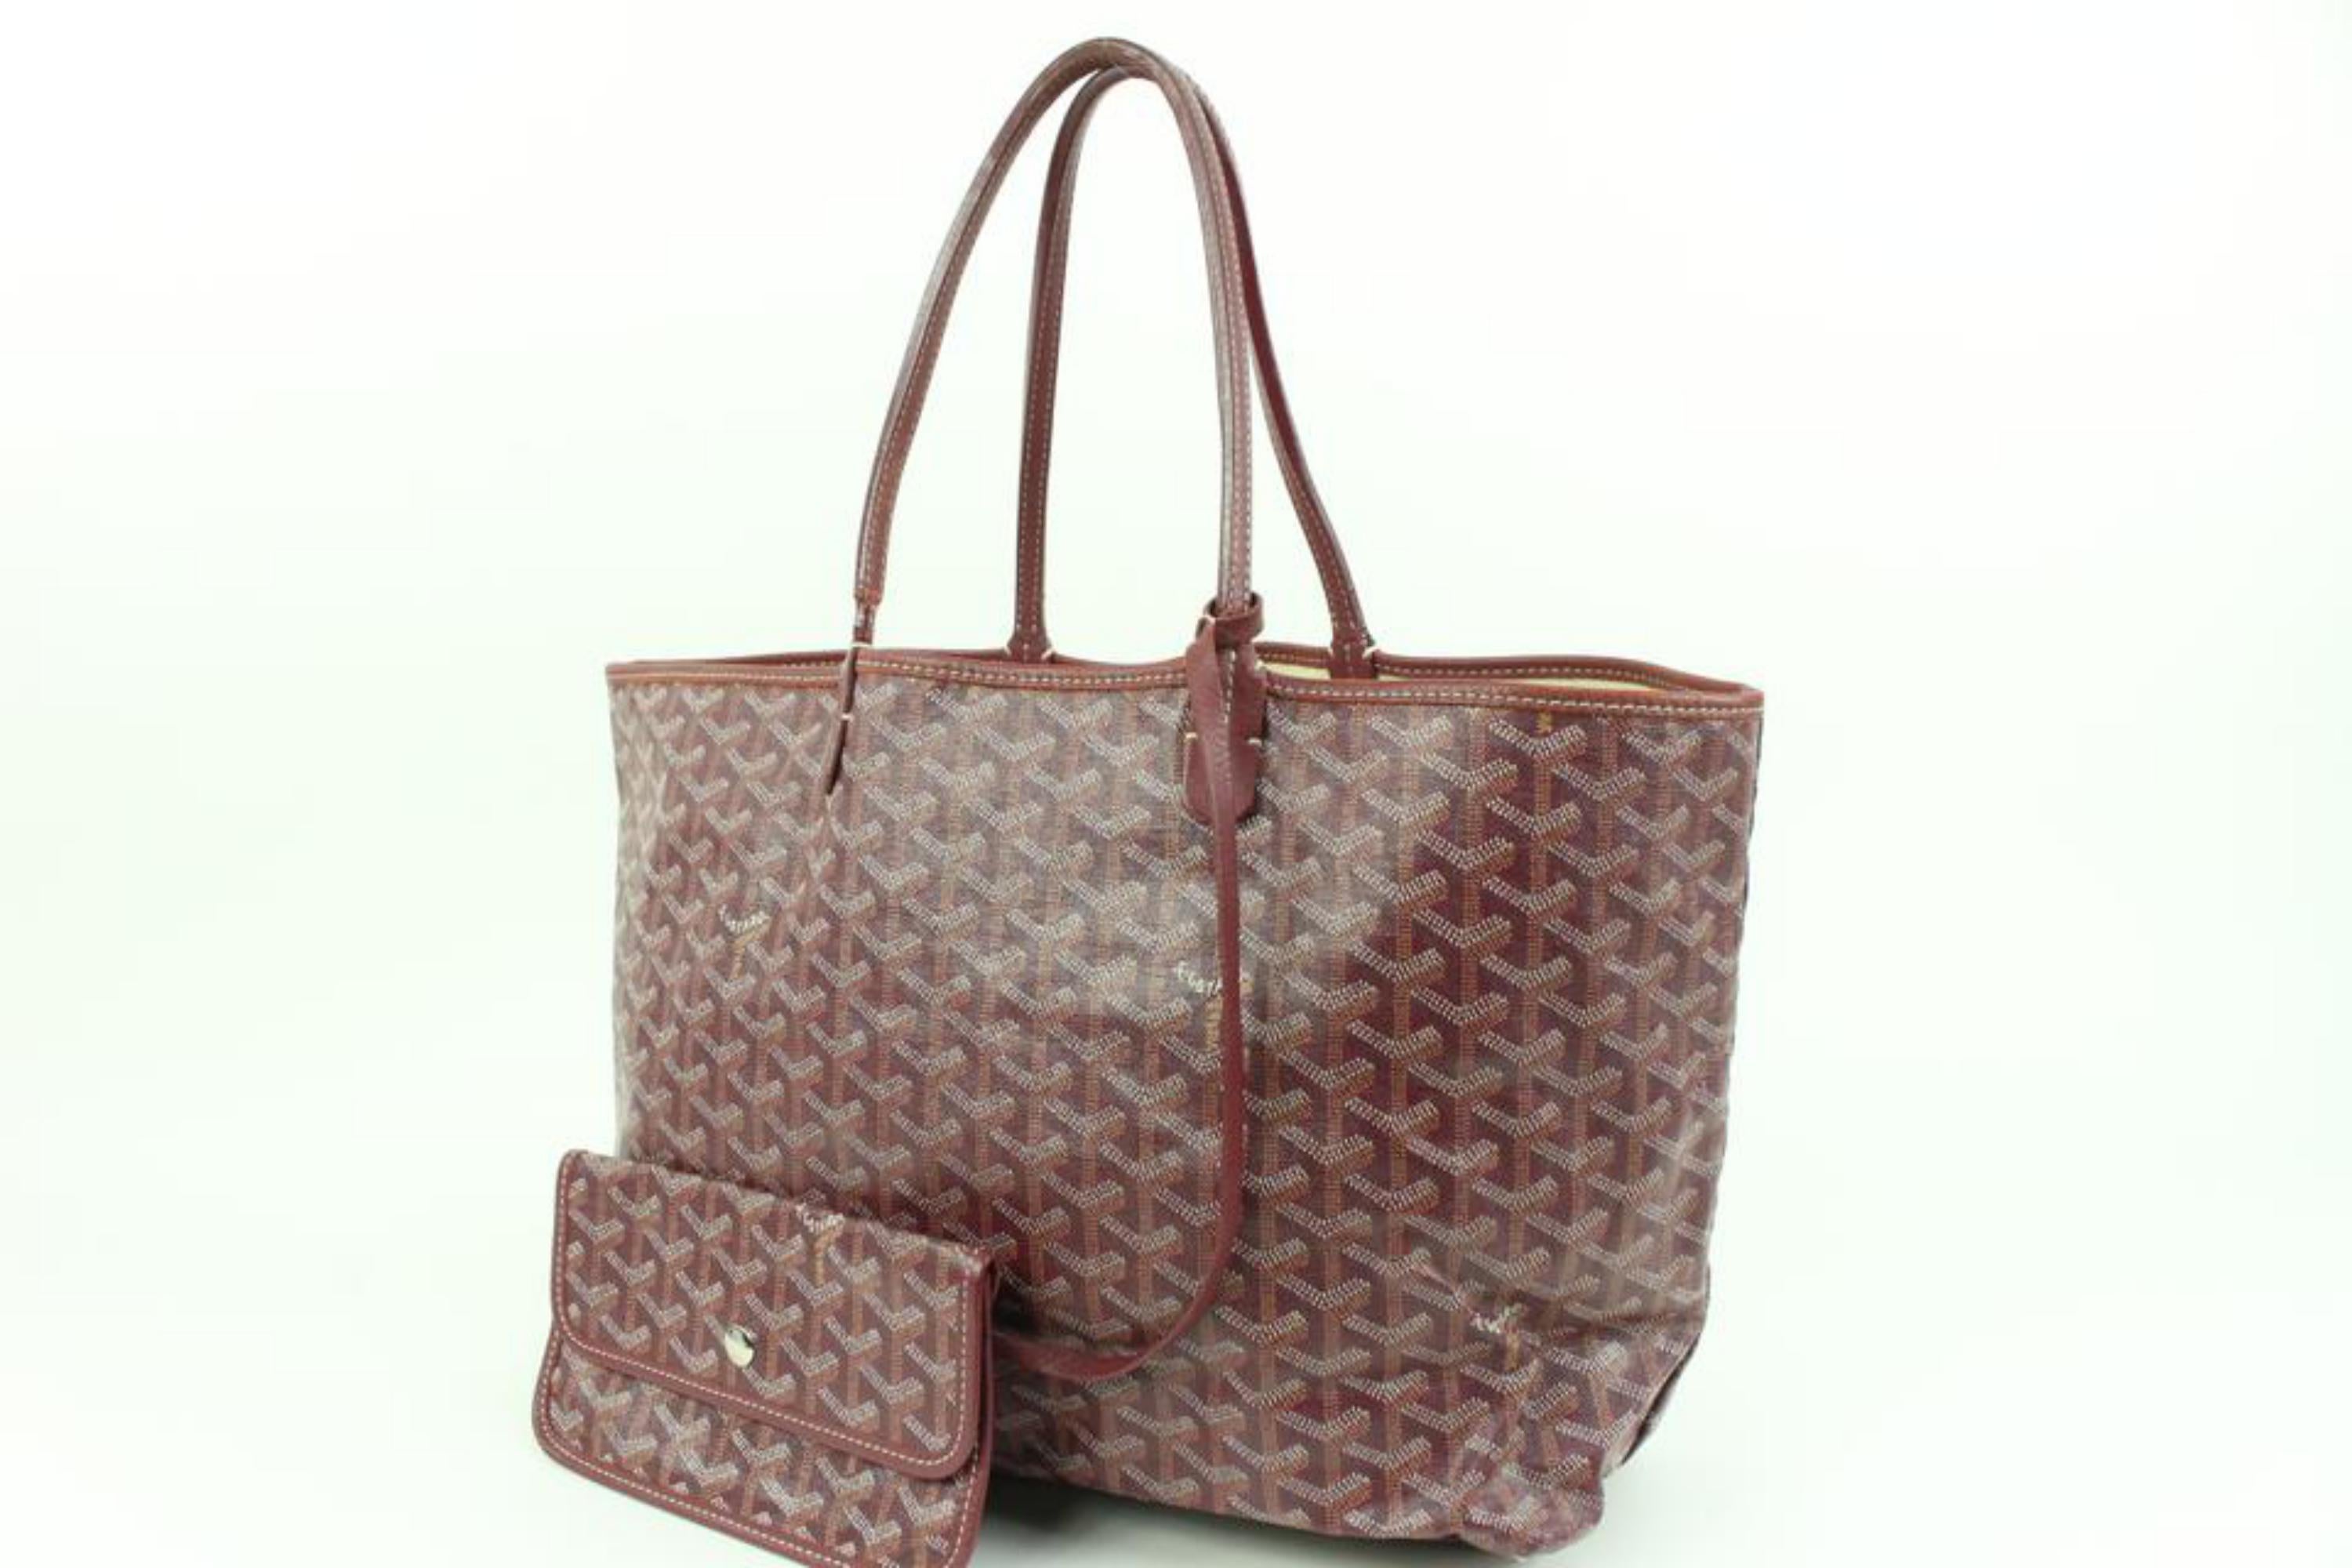 Goyard Bordeaux Chevron St Louis PM Tote with Pouch 82gy322s
Date Code/Serial Number: BAL020115
Made In: France
Measurements: Length:  18